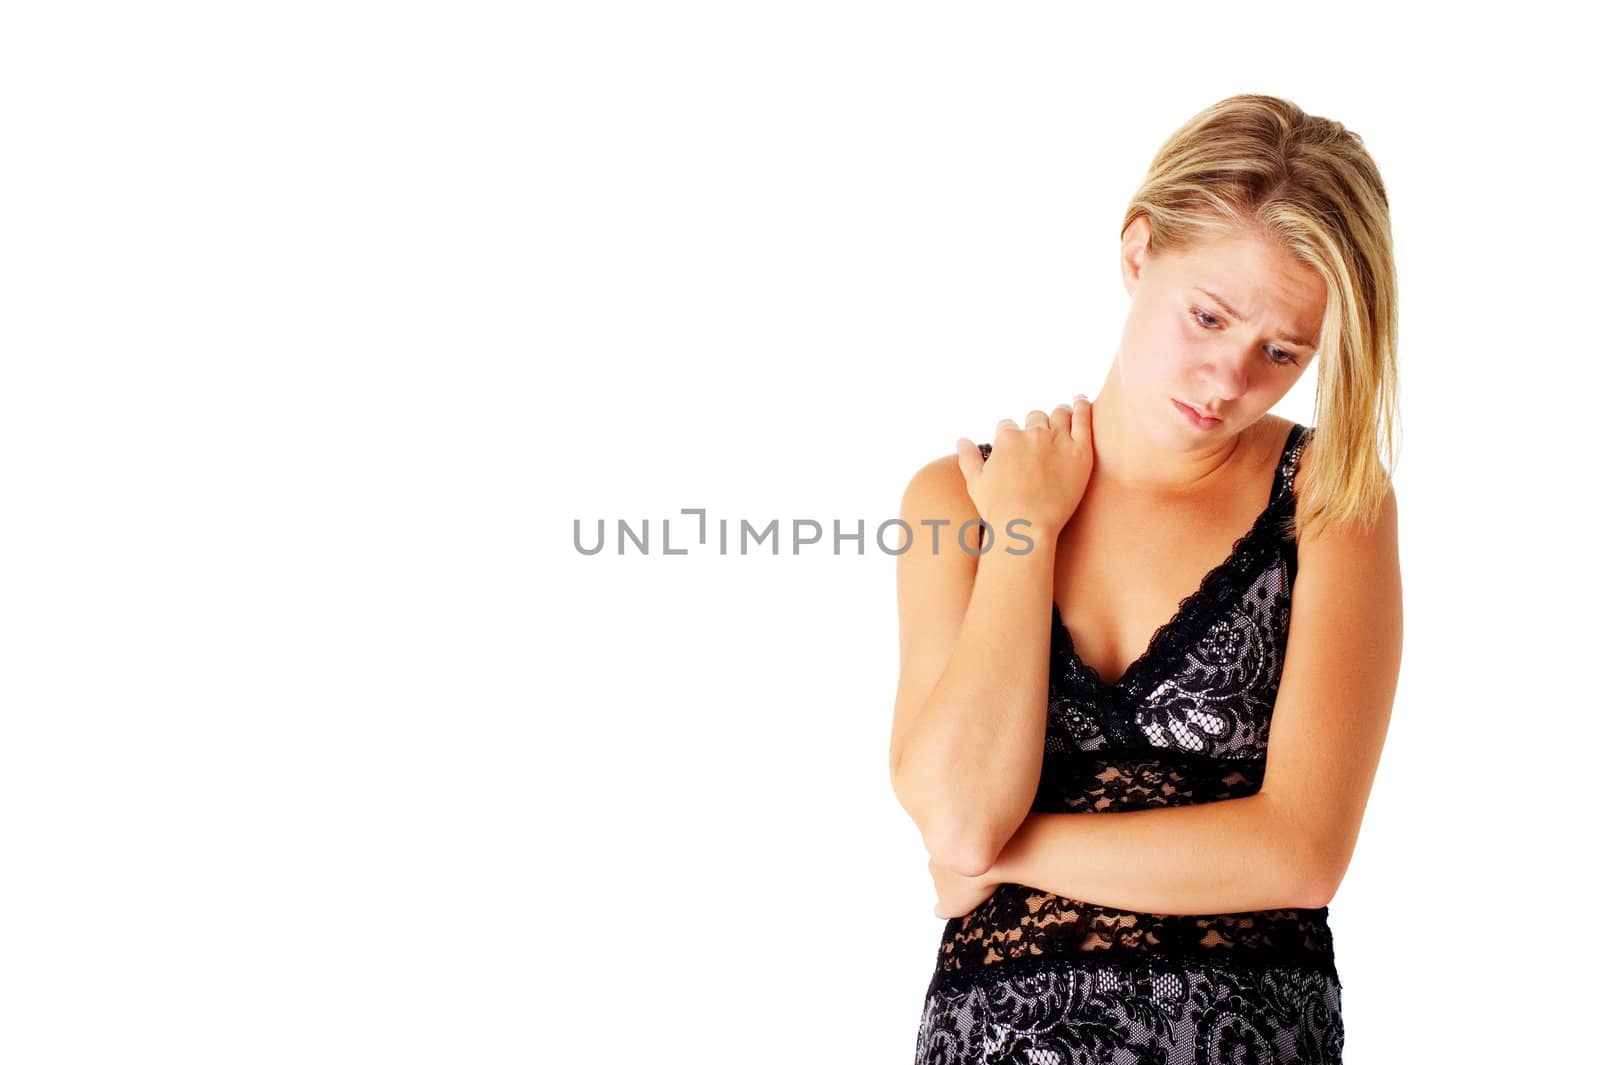 Sad girl in a dress, against a white background.